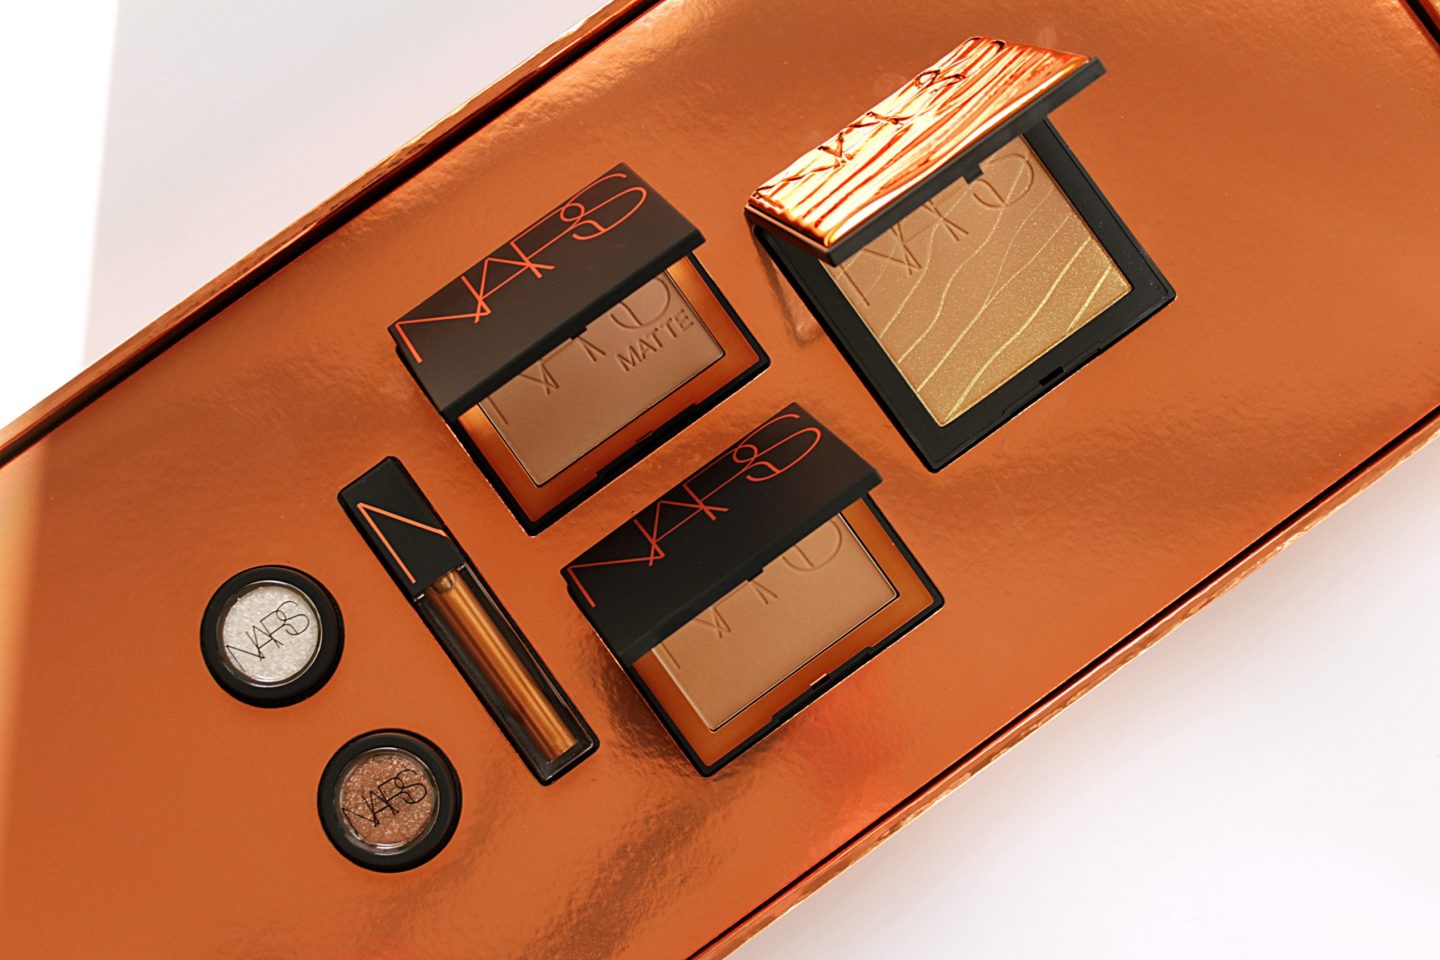 Nars | Summer 2020 Bronzed Collection